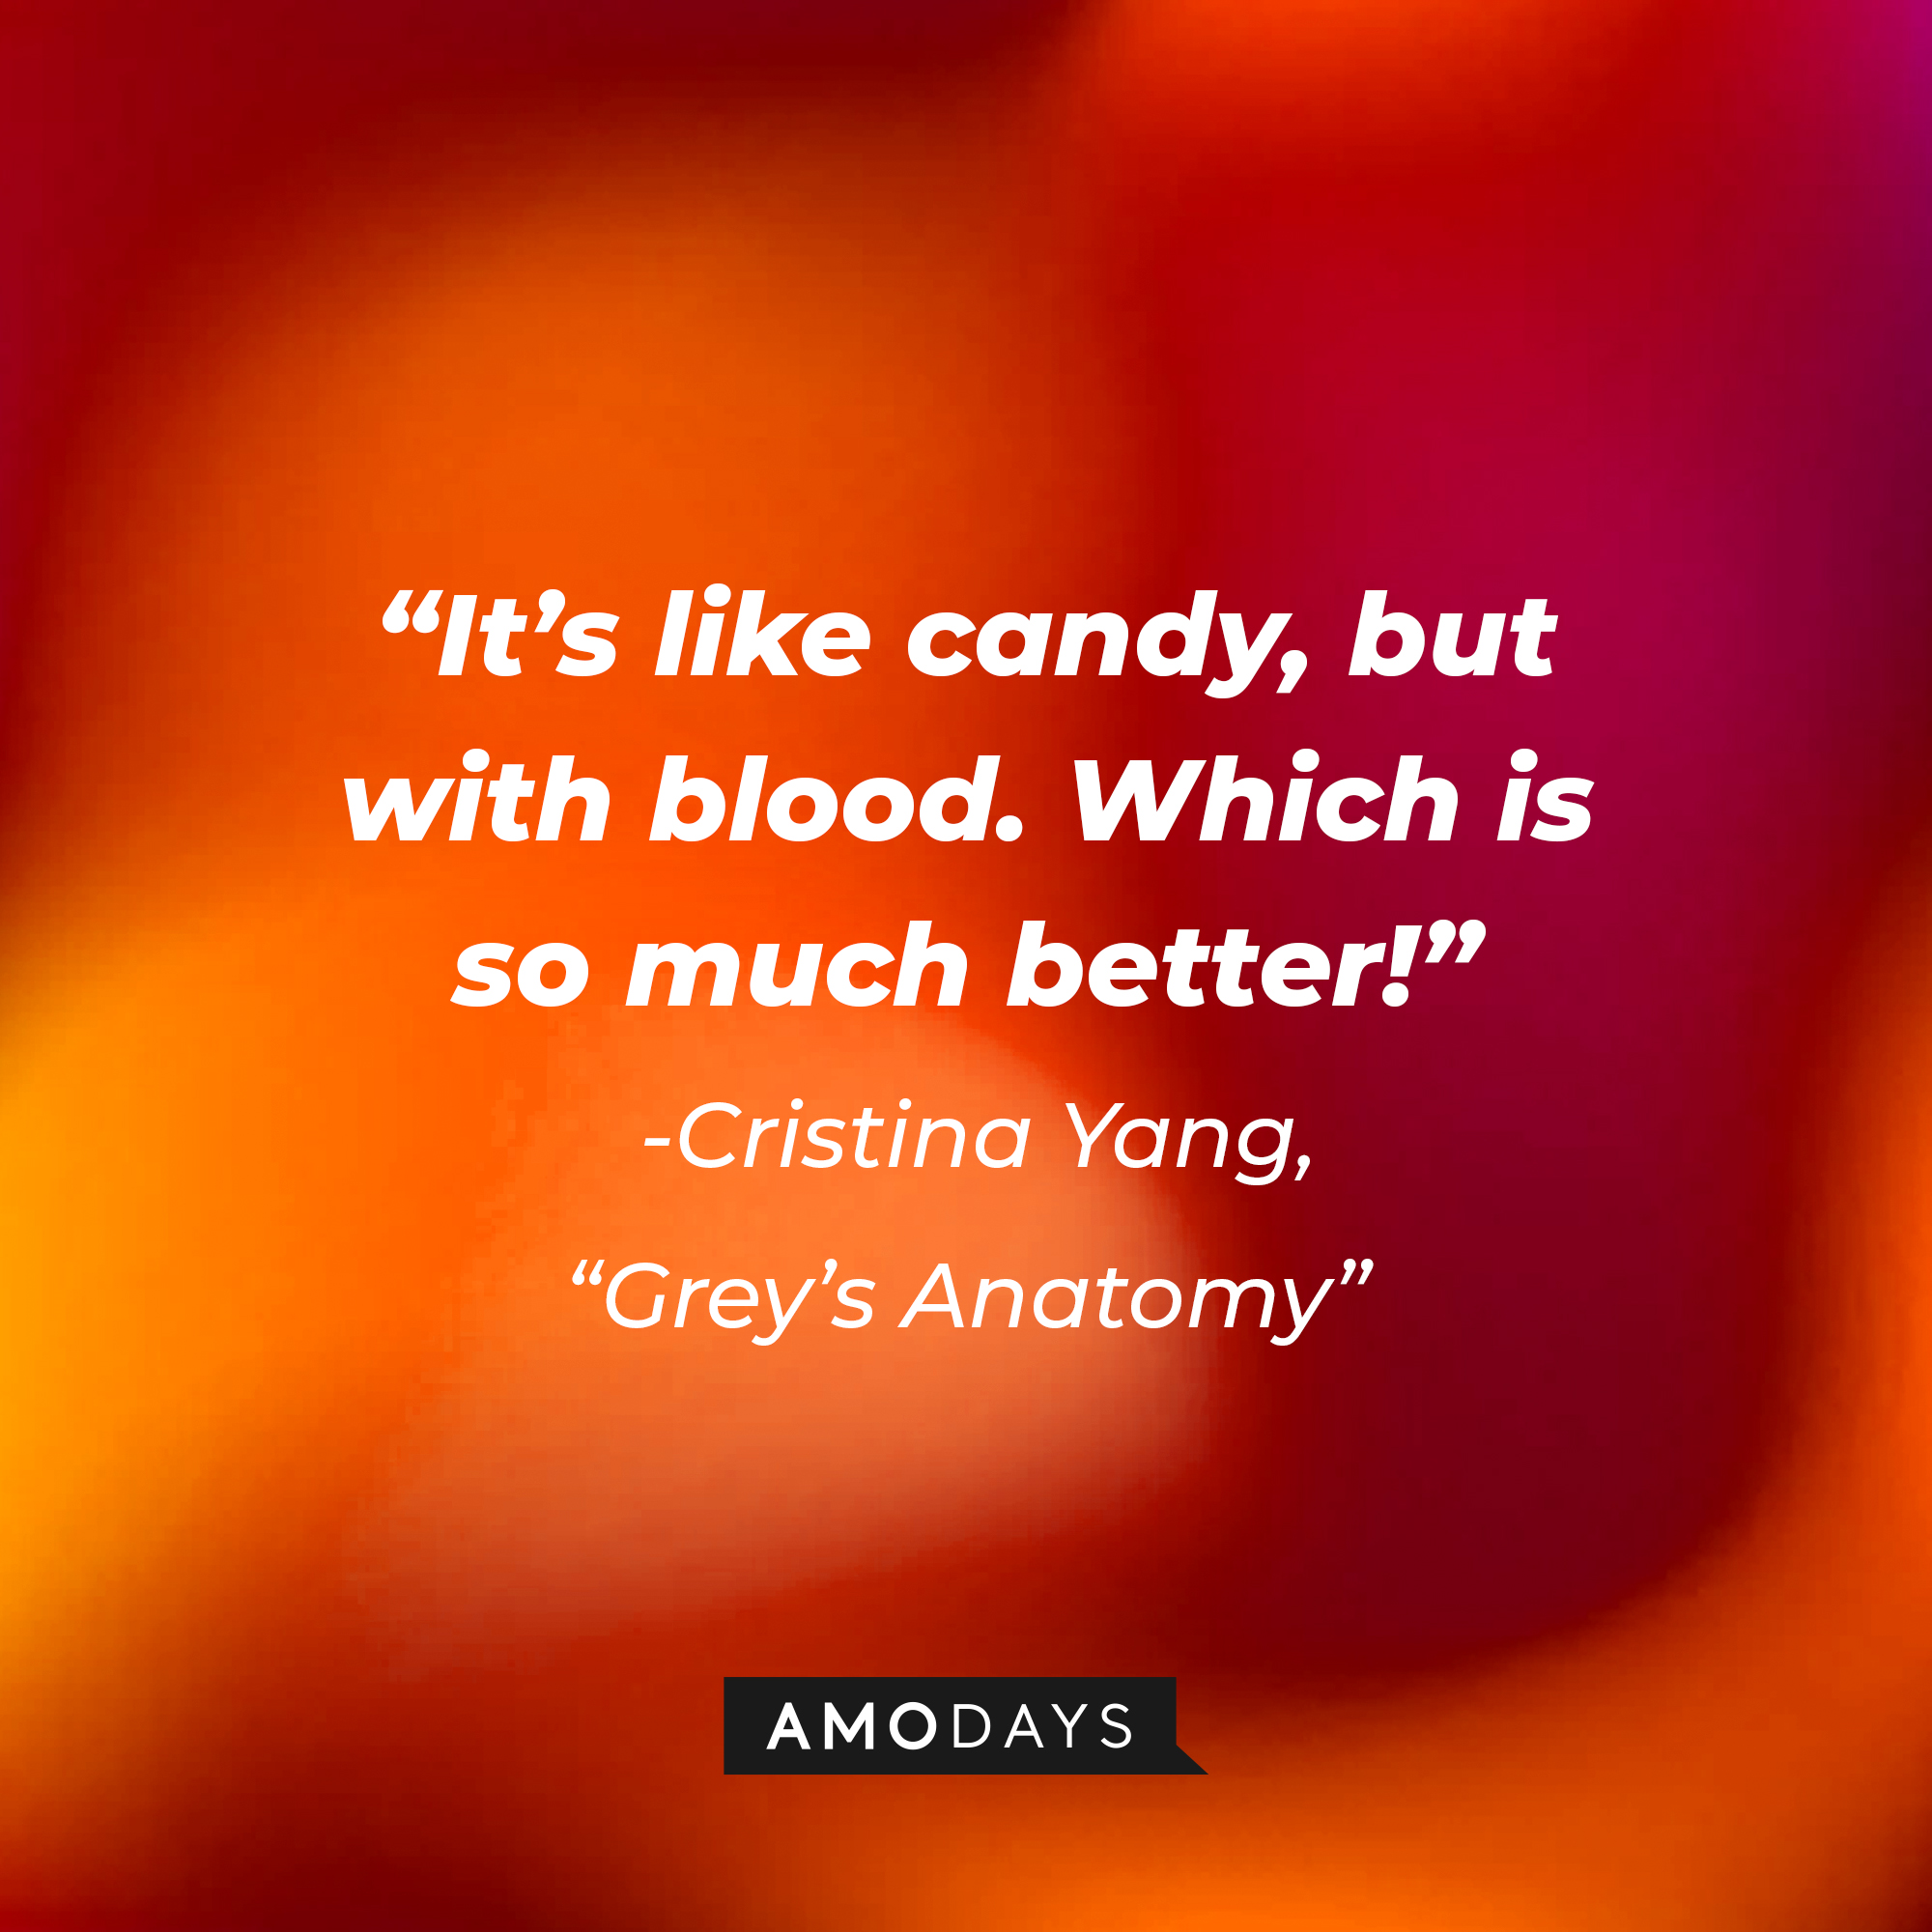 Cristina Yang's quote on "Grey's Anatomy:" “It’s like candy, but with blood. Which is so much better!” | Source: AmoDays